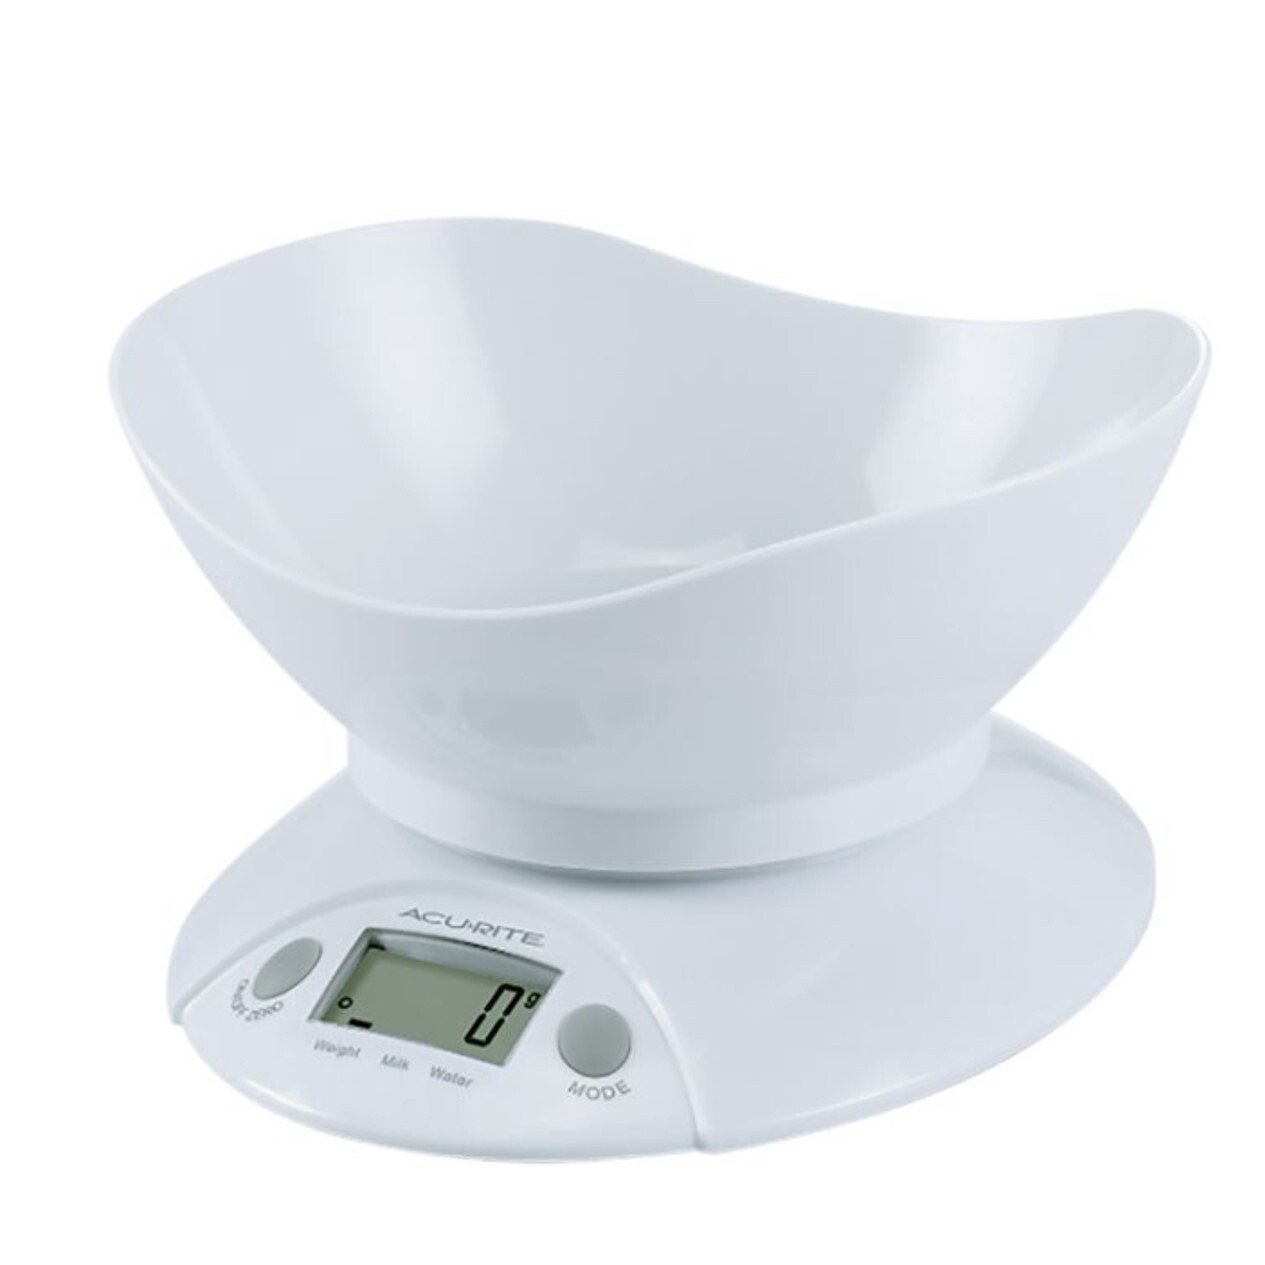 Acurite Digital Kitchen Scale with Bowl